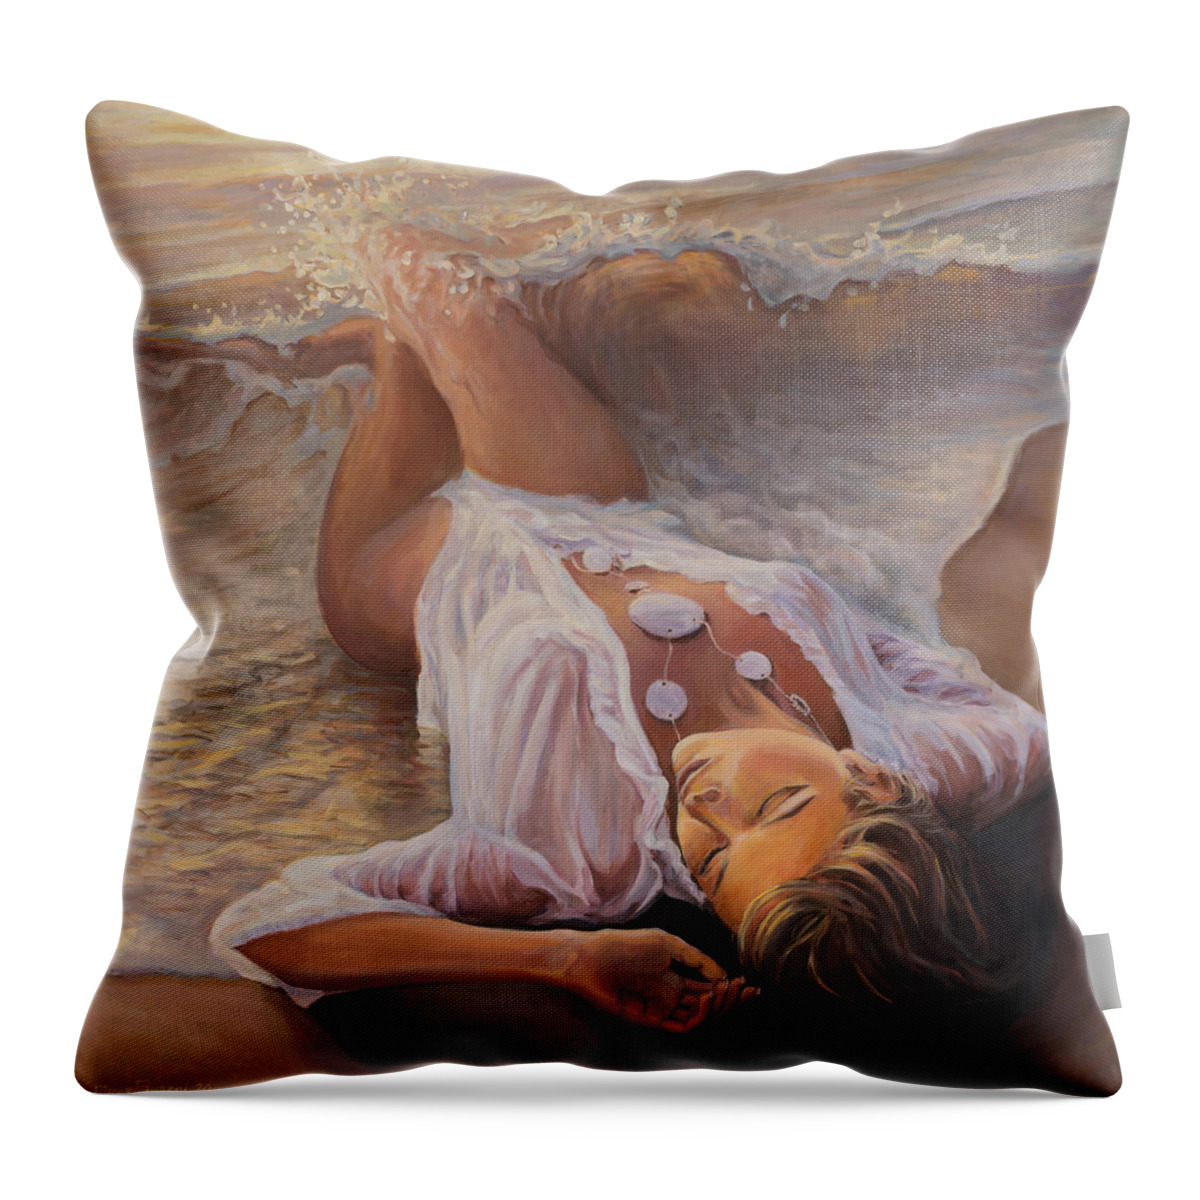 Mermaid Throw Pillow featuring the painting Born from the waves by Marco Busoni